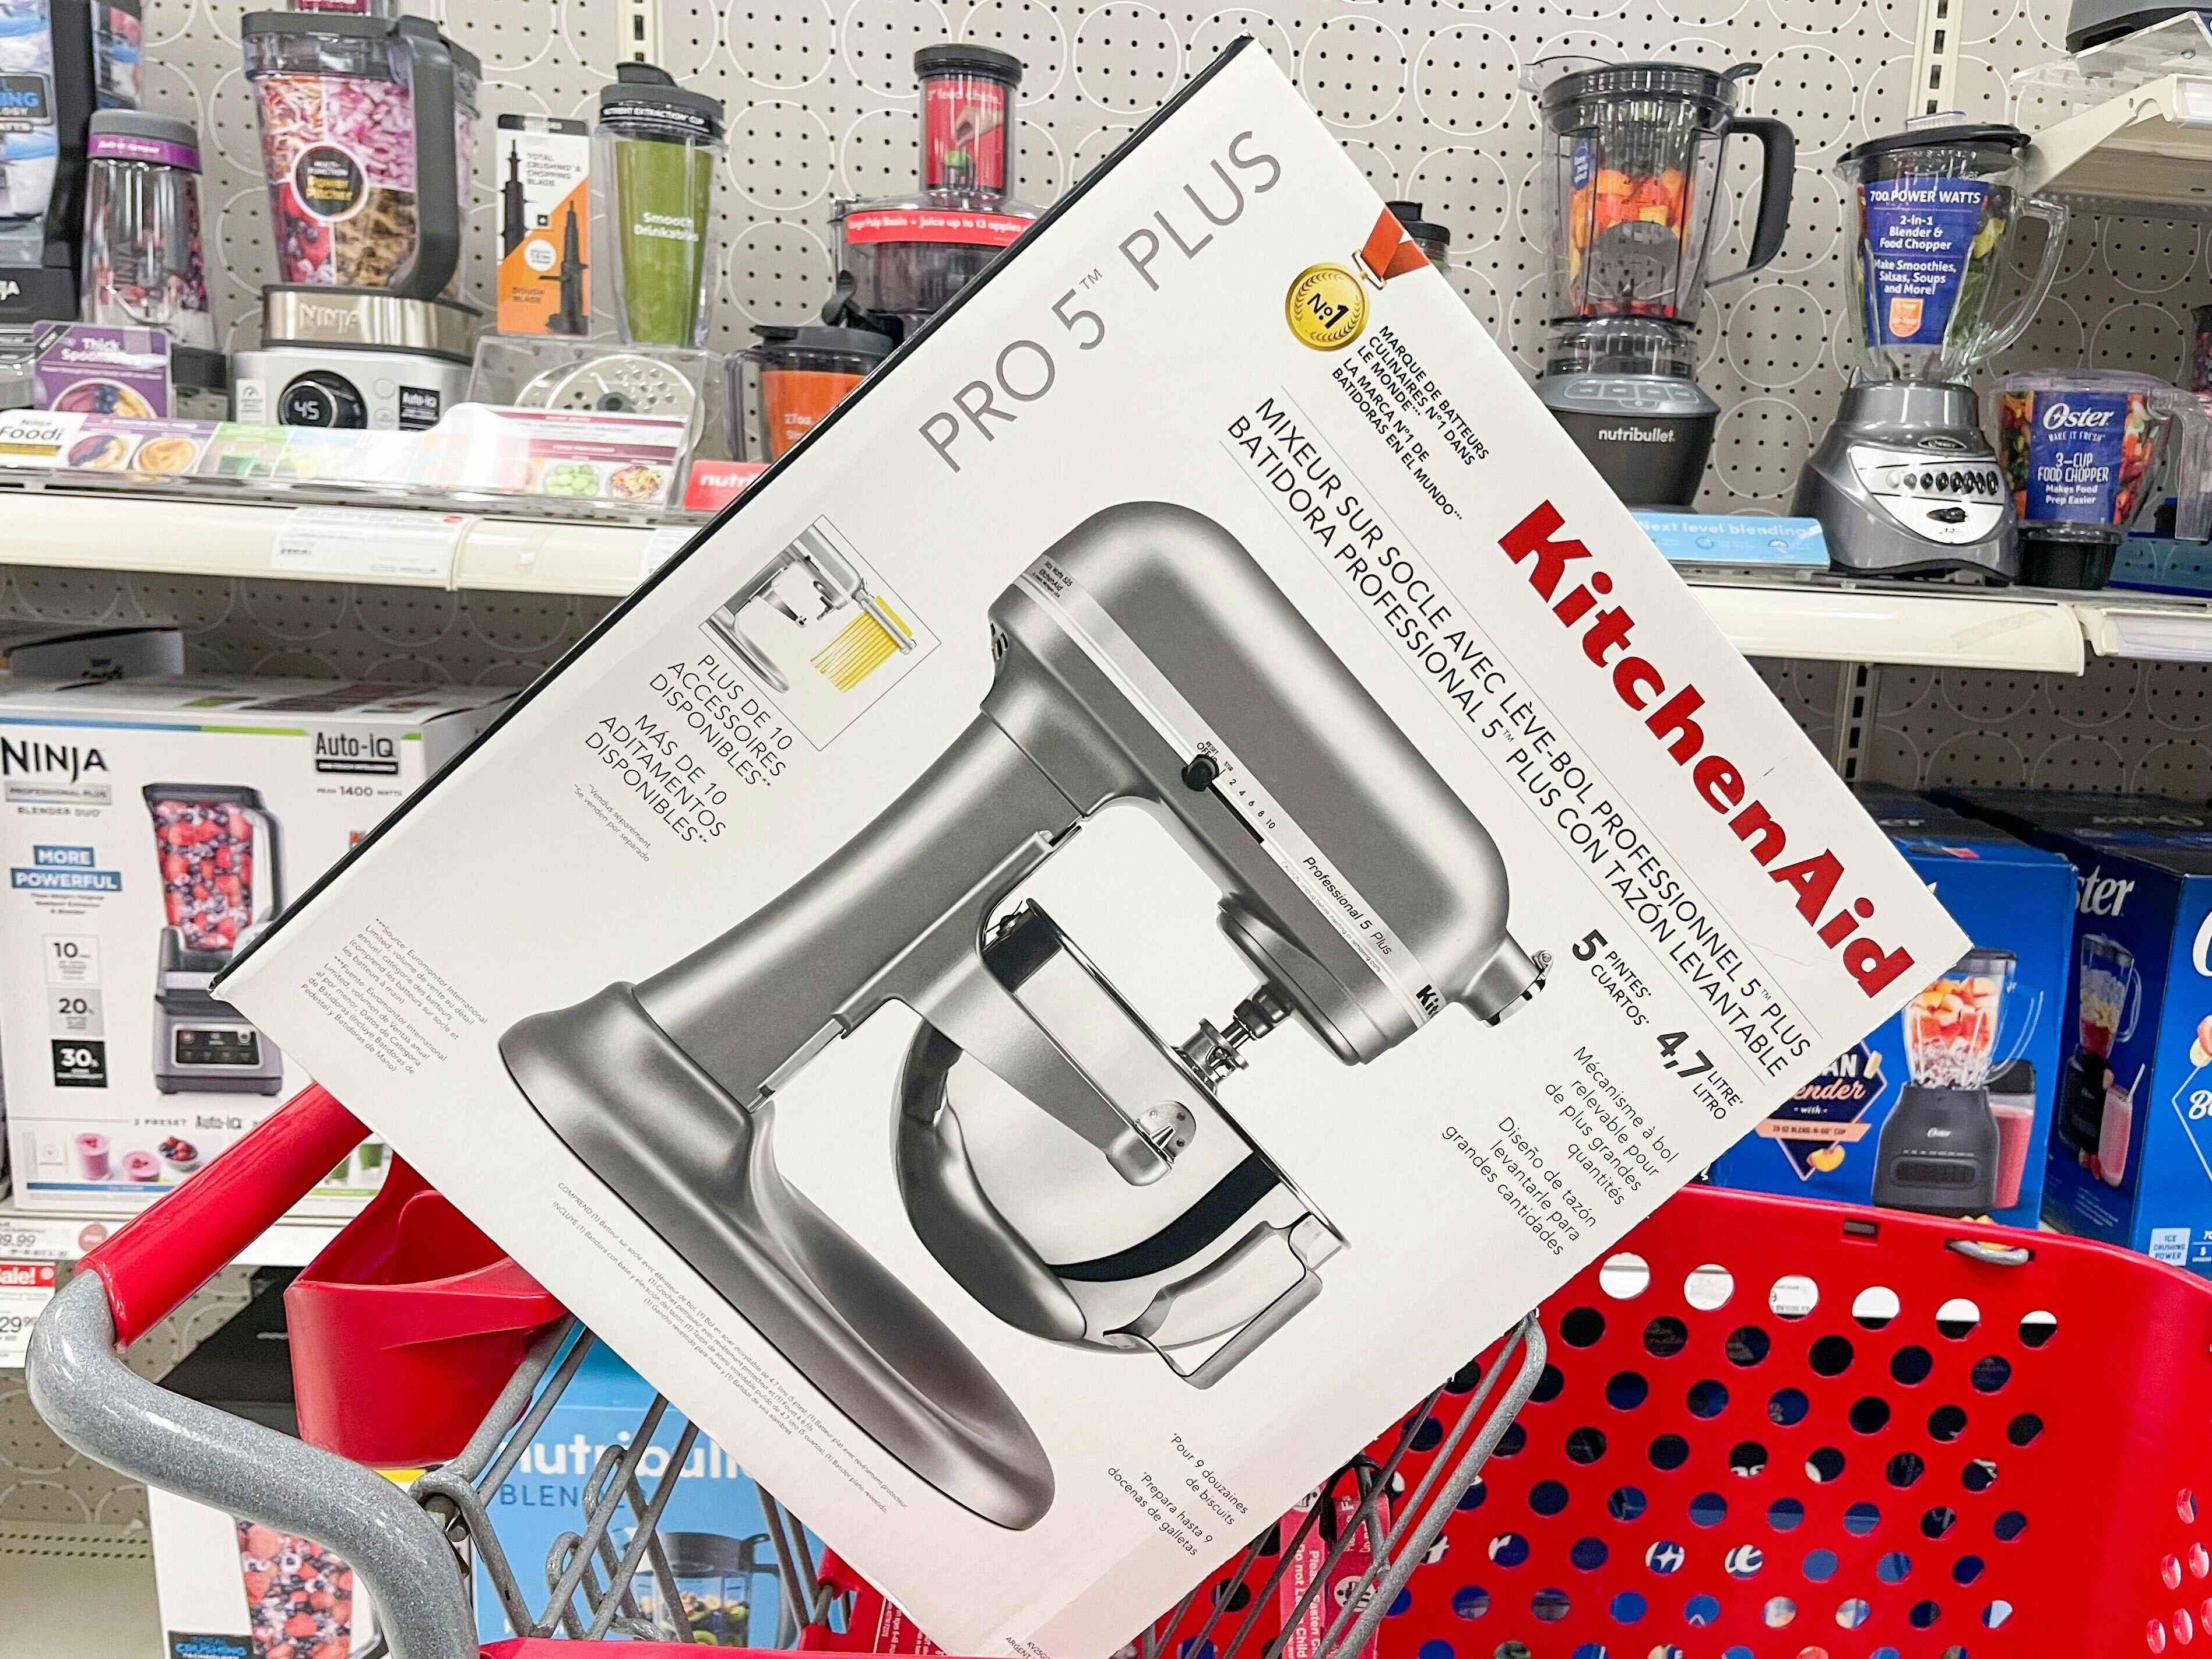 Hurry to Save $130 on a KitchenAid Stand Mixer During Target Circle Week